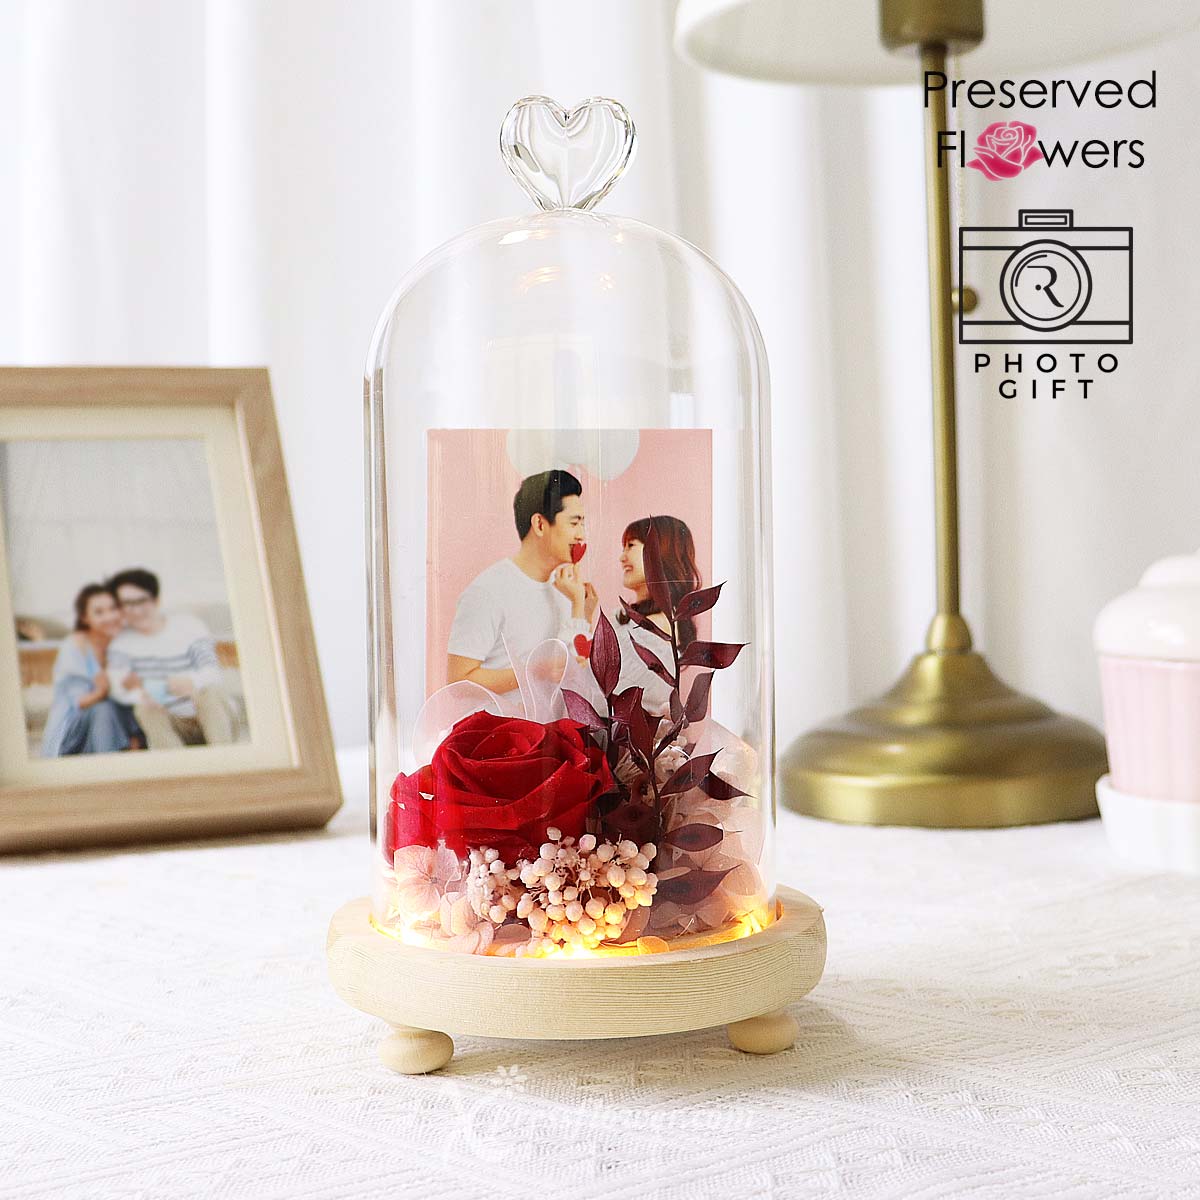 PR2305 Everlasting Romance (Preserved Flowers with Personalised Photo) 3a